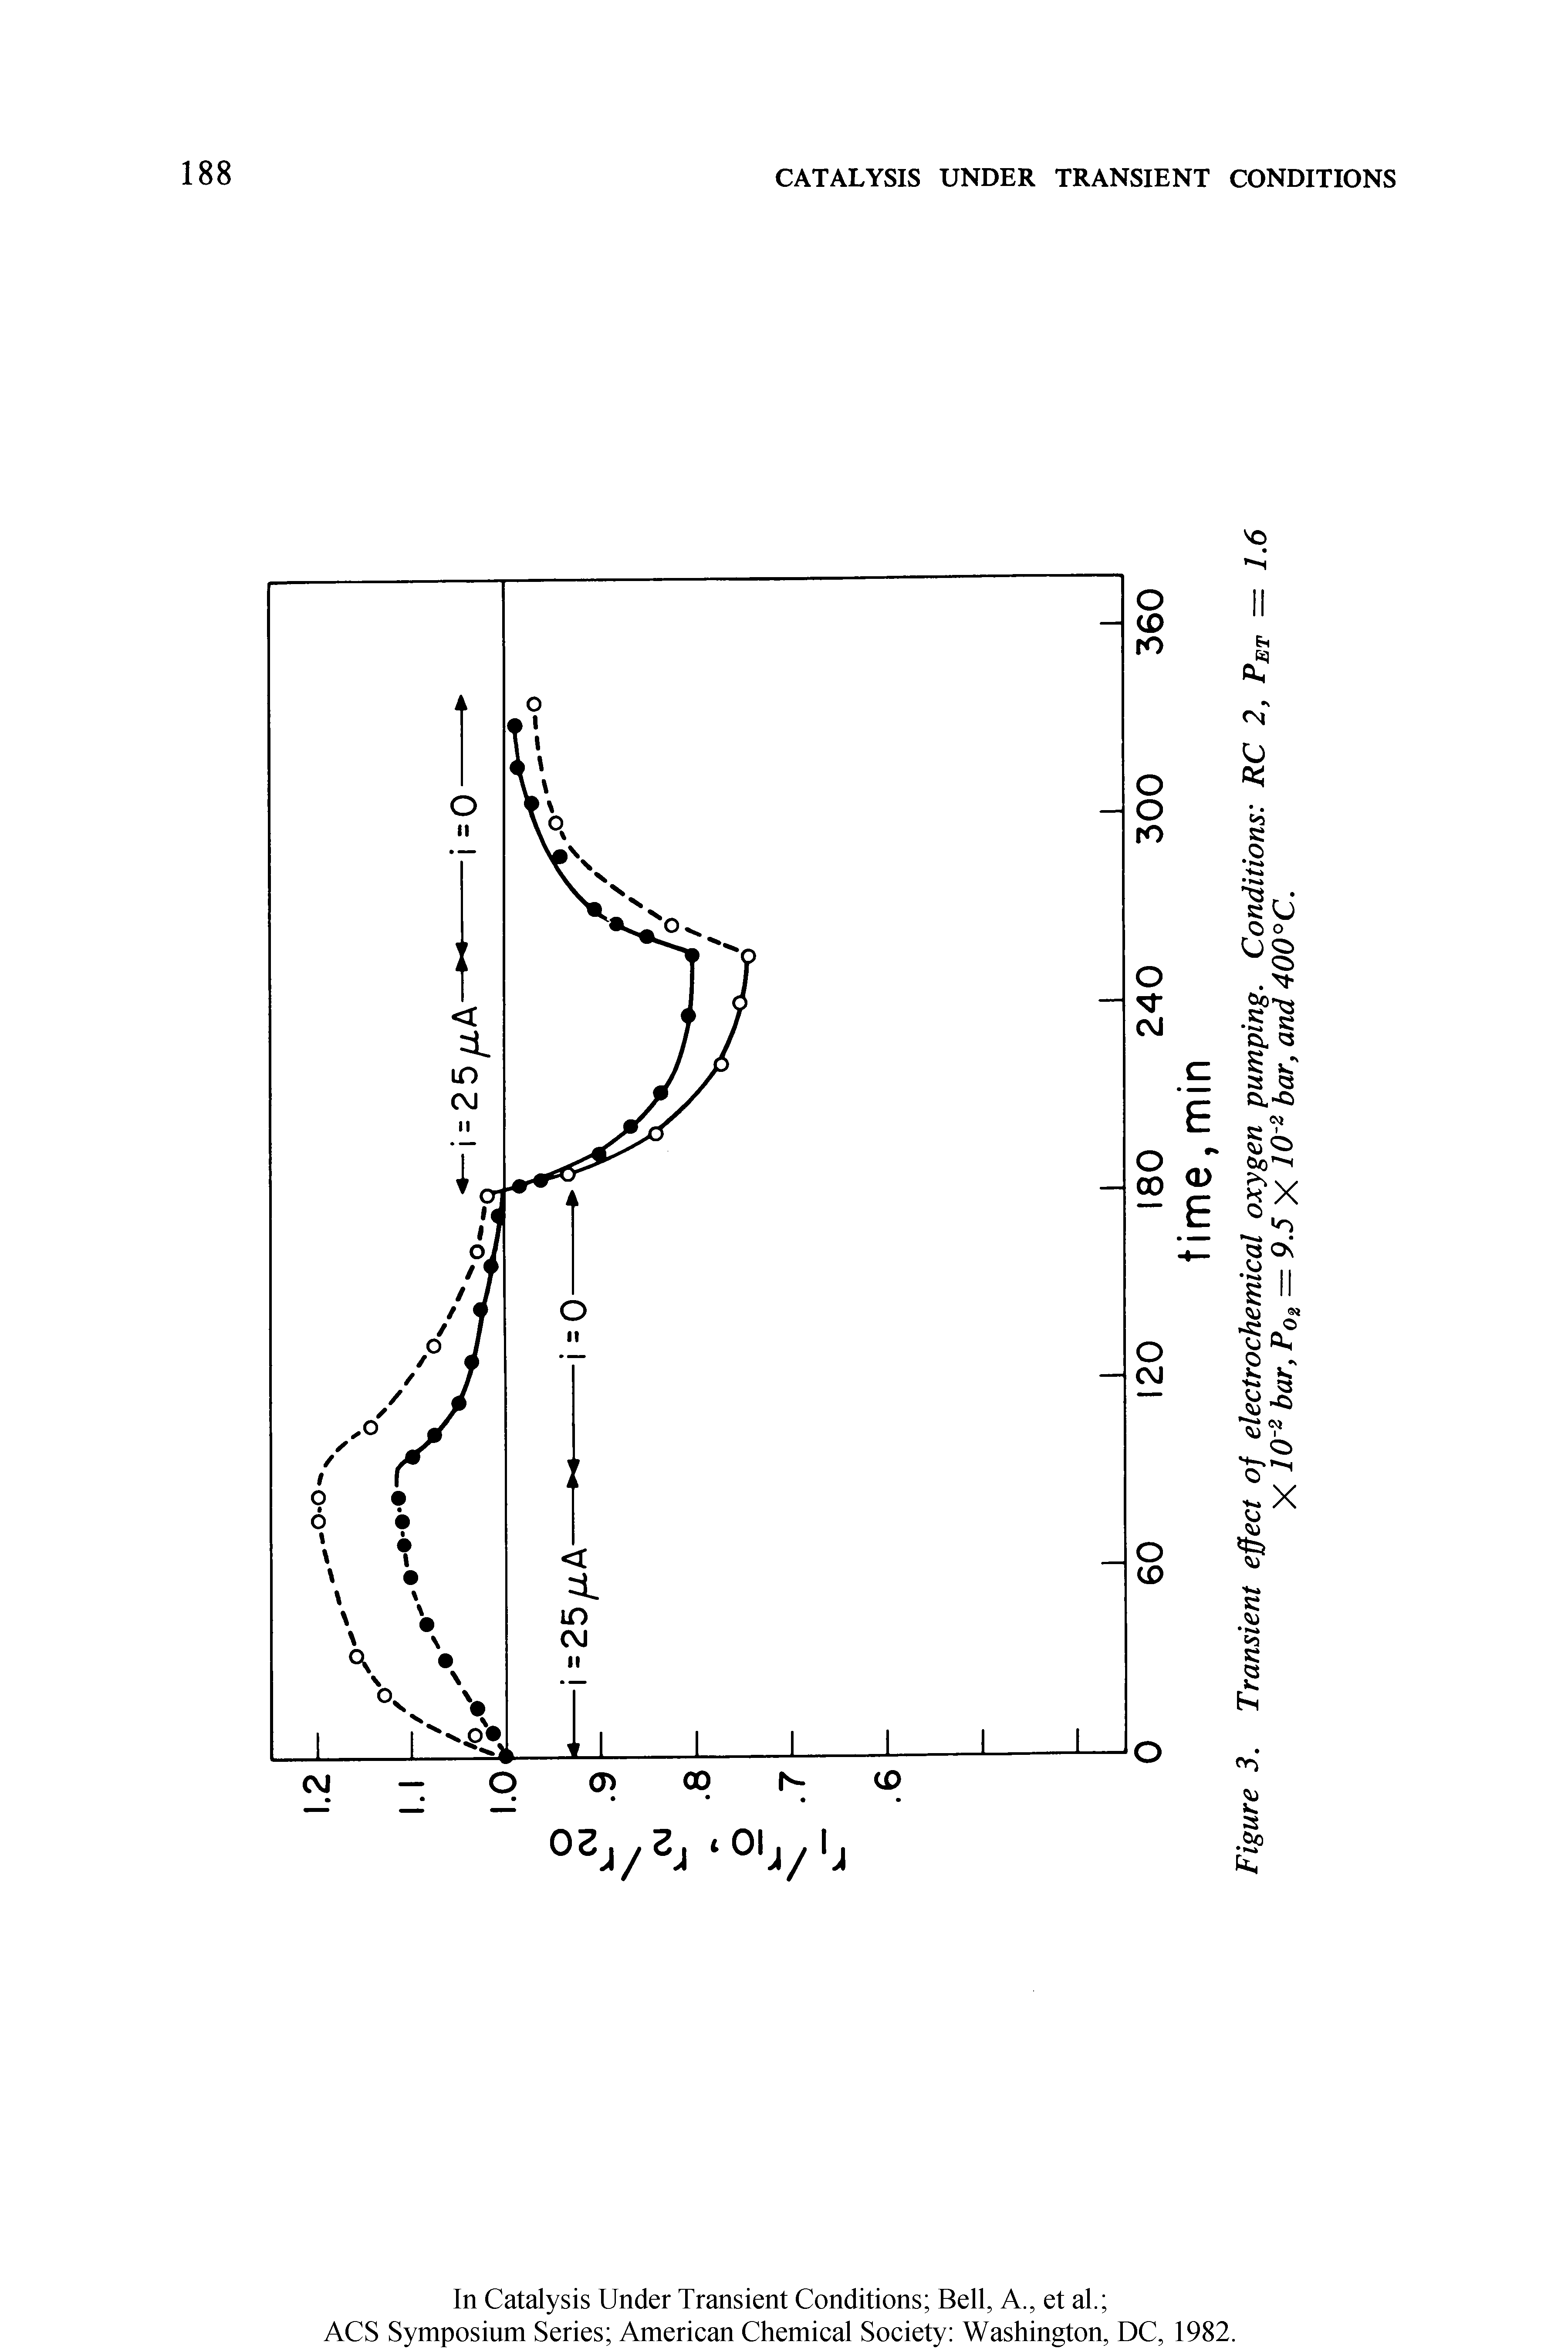 Figure 3. Transient effect of electrochemical oxygen pumping. Conditions RC 2, Pi X 10-2 bar, P0jt = 9.5 X 10 2 bar, and 400°C.